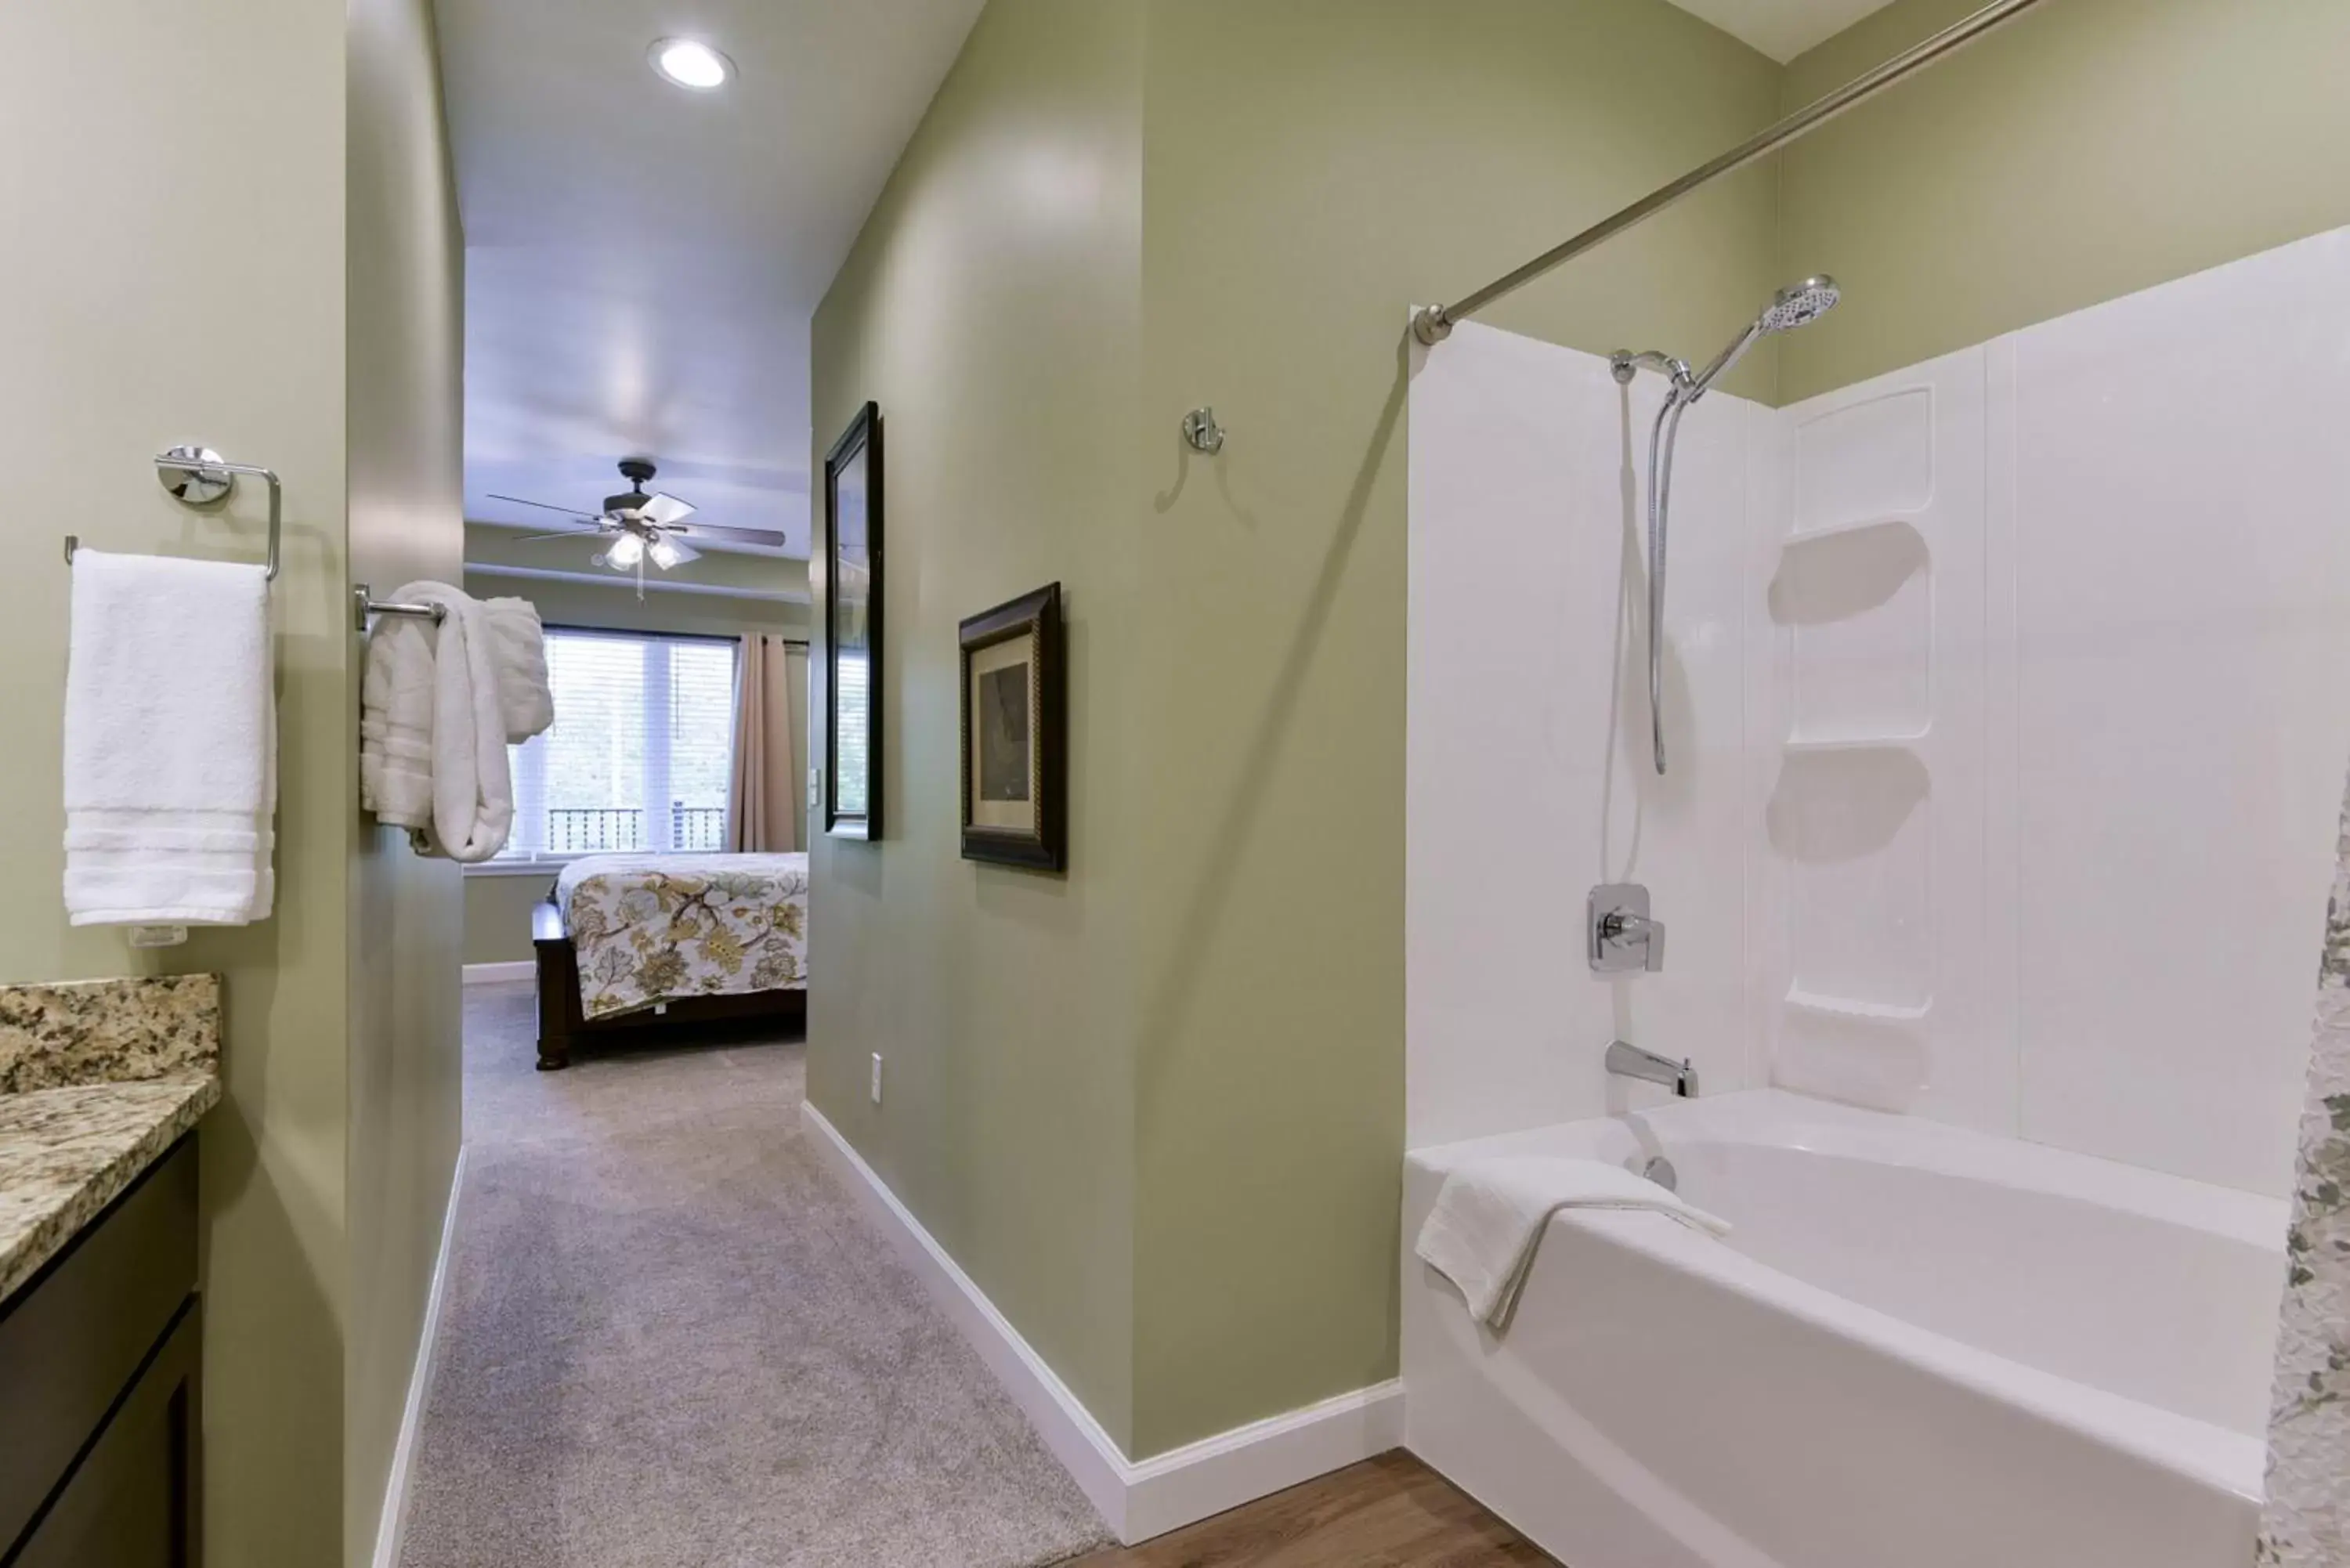 Bathroom in Luxury Condos at Thousand Hills - Branson -Beautifully Remodeled